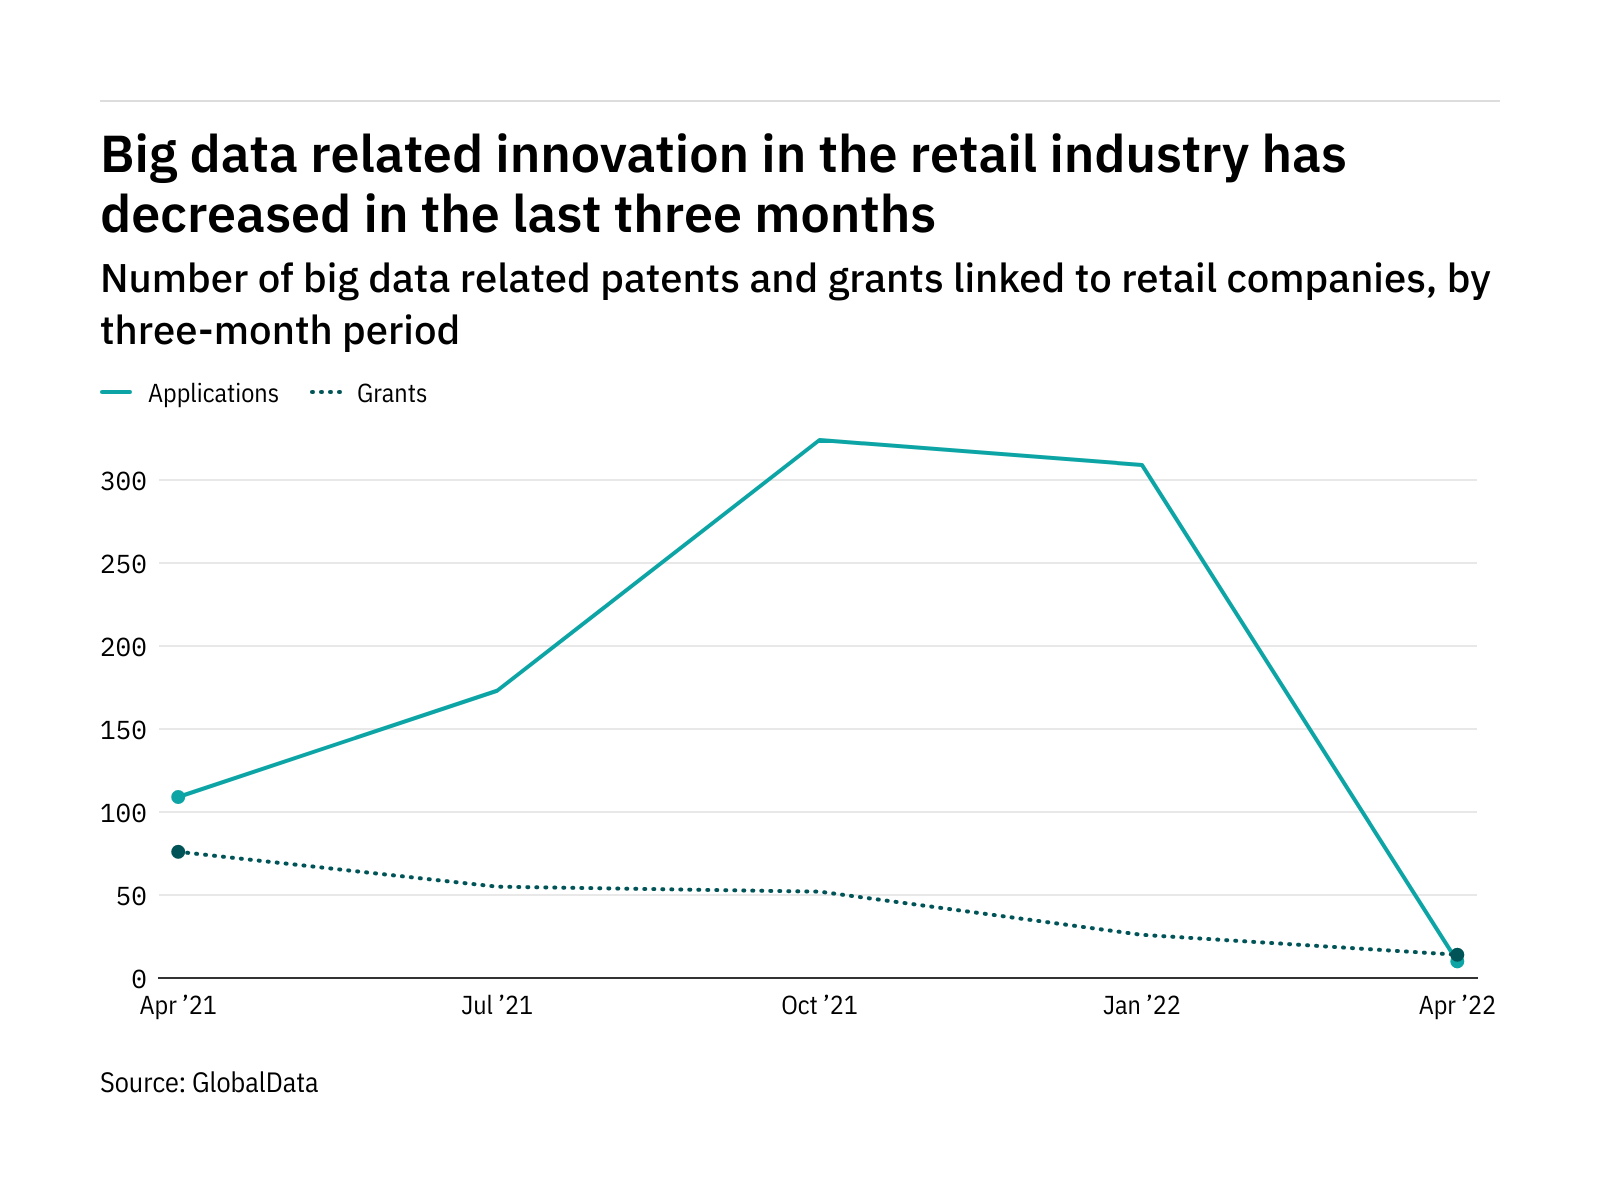 Big data innovation among retail industry companies has dropped off in the last year